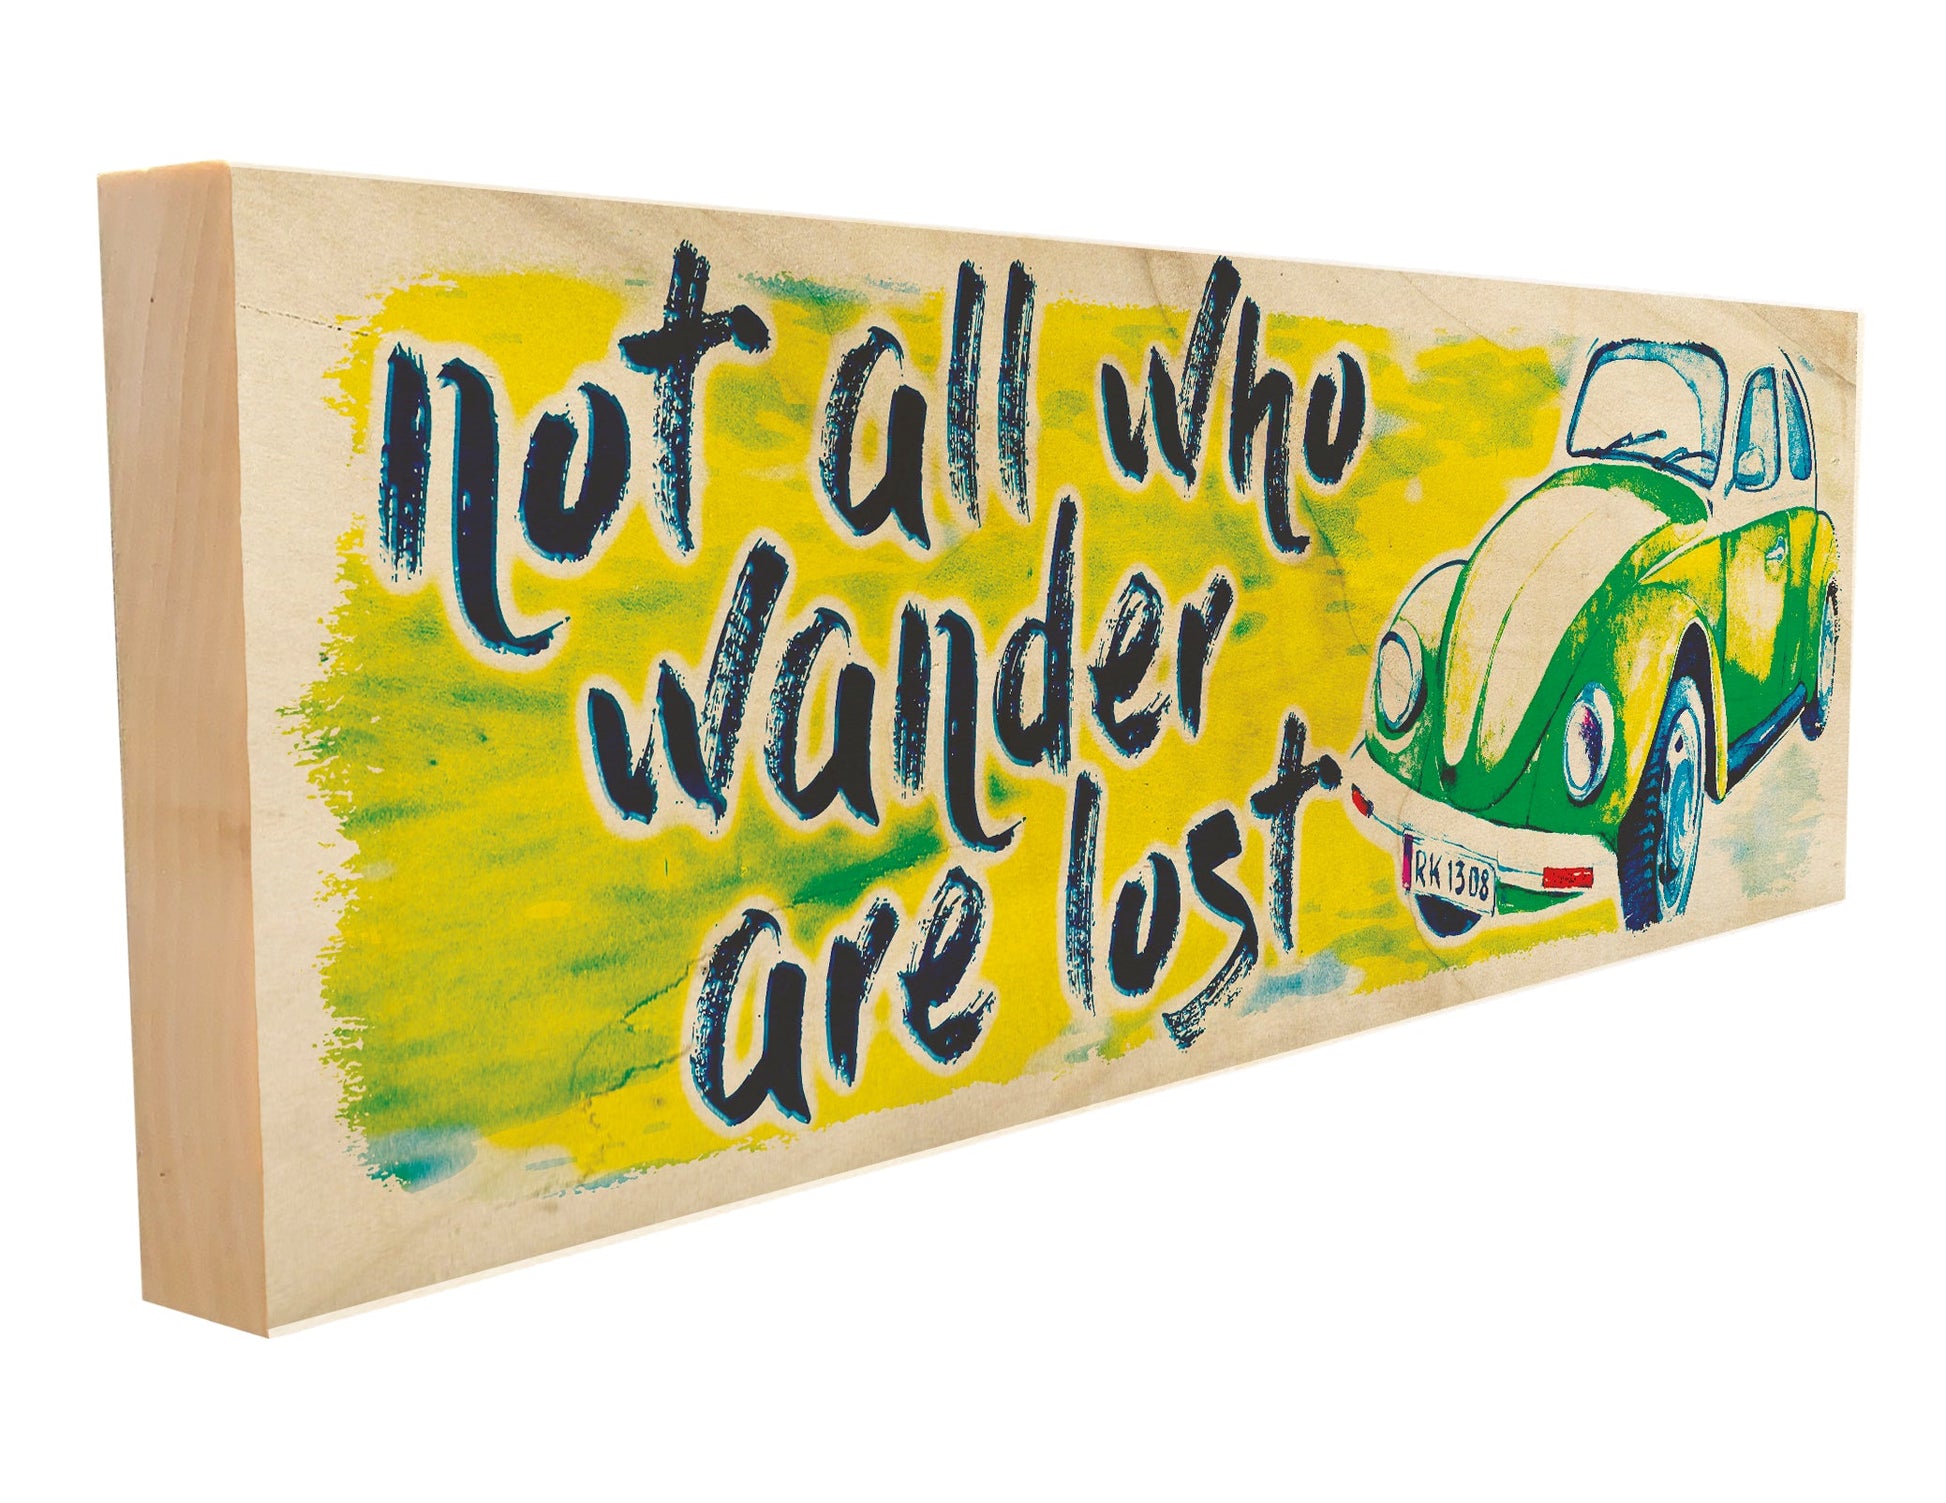 Not All Who Wander are Lost.